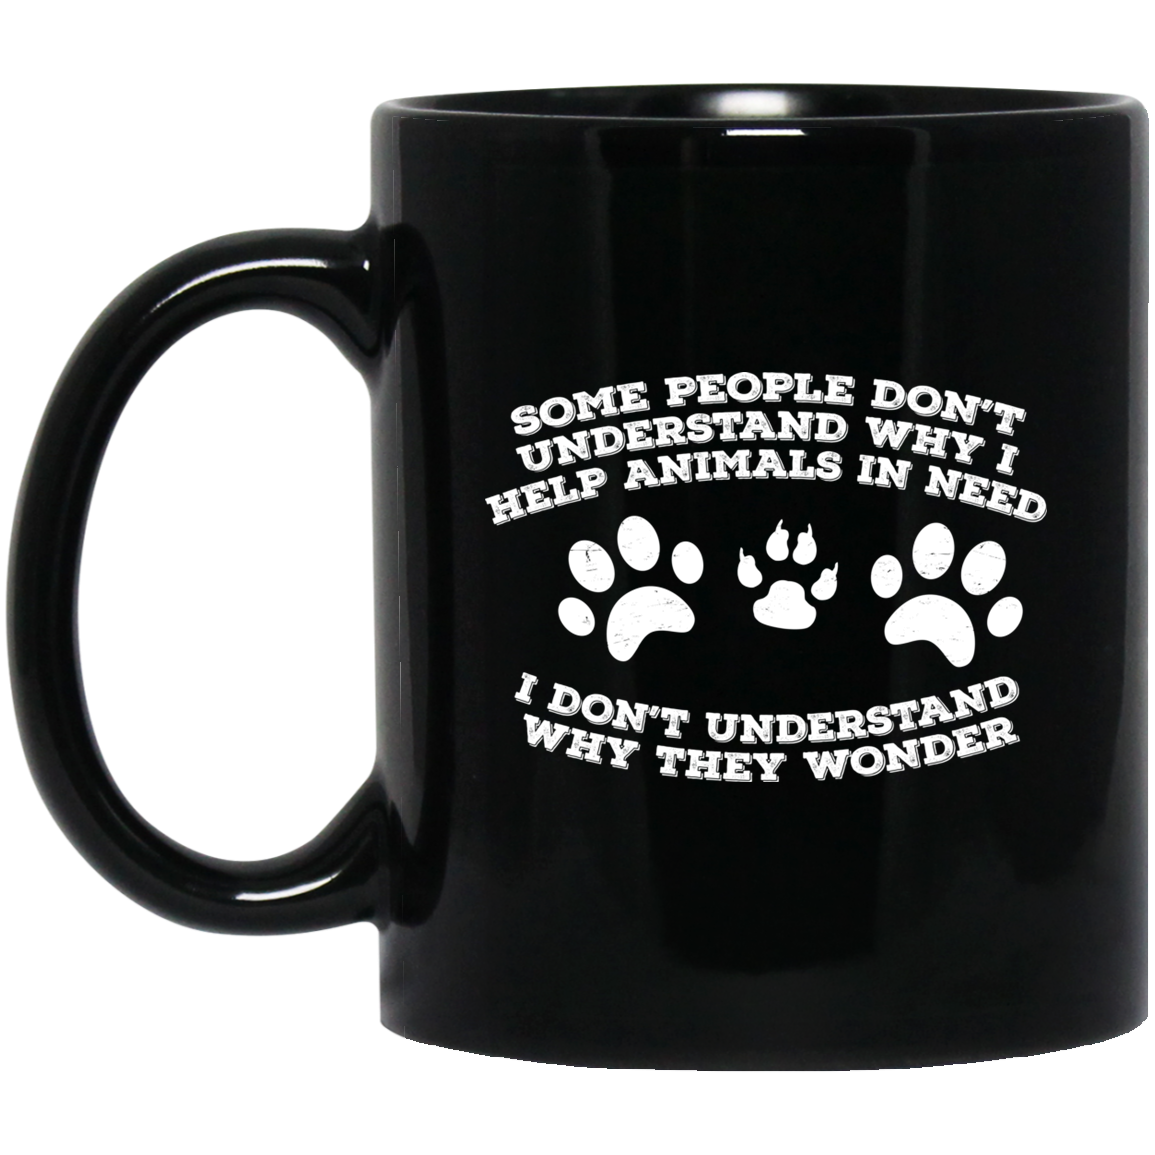 Some People Don't Understand - Black Mugs